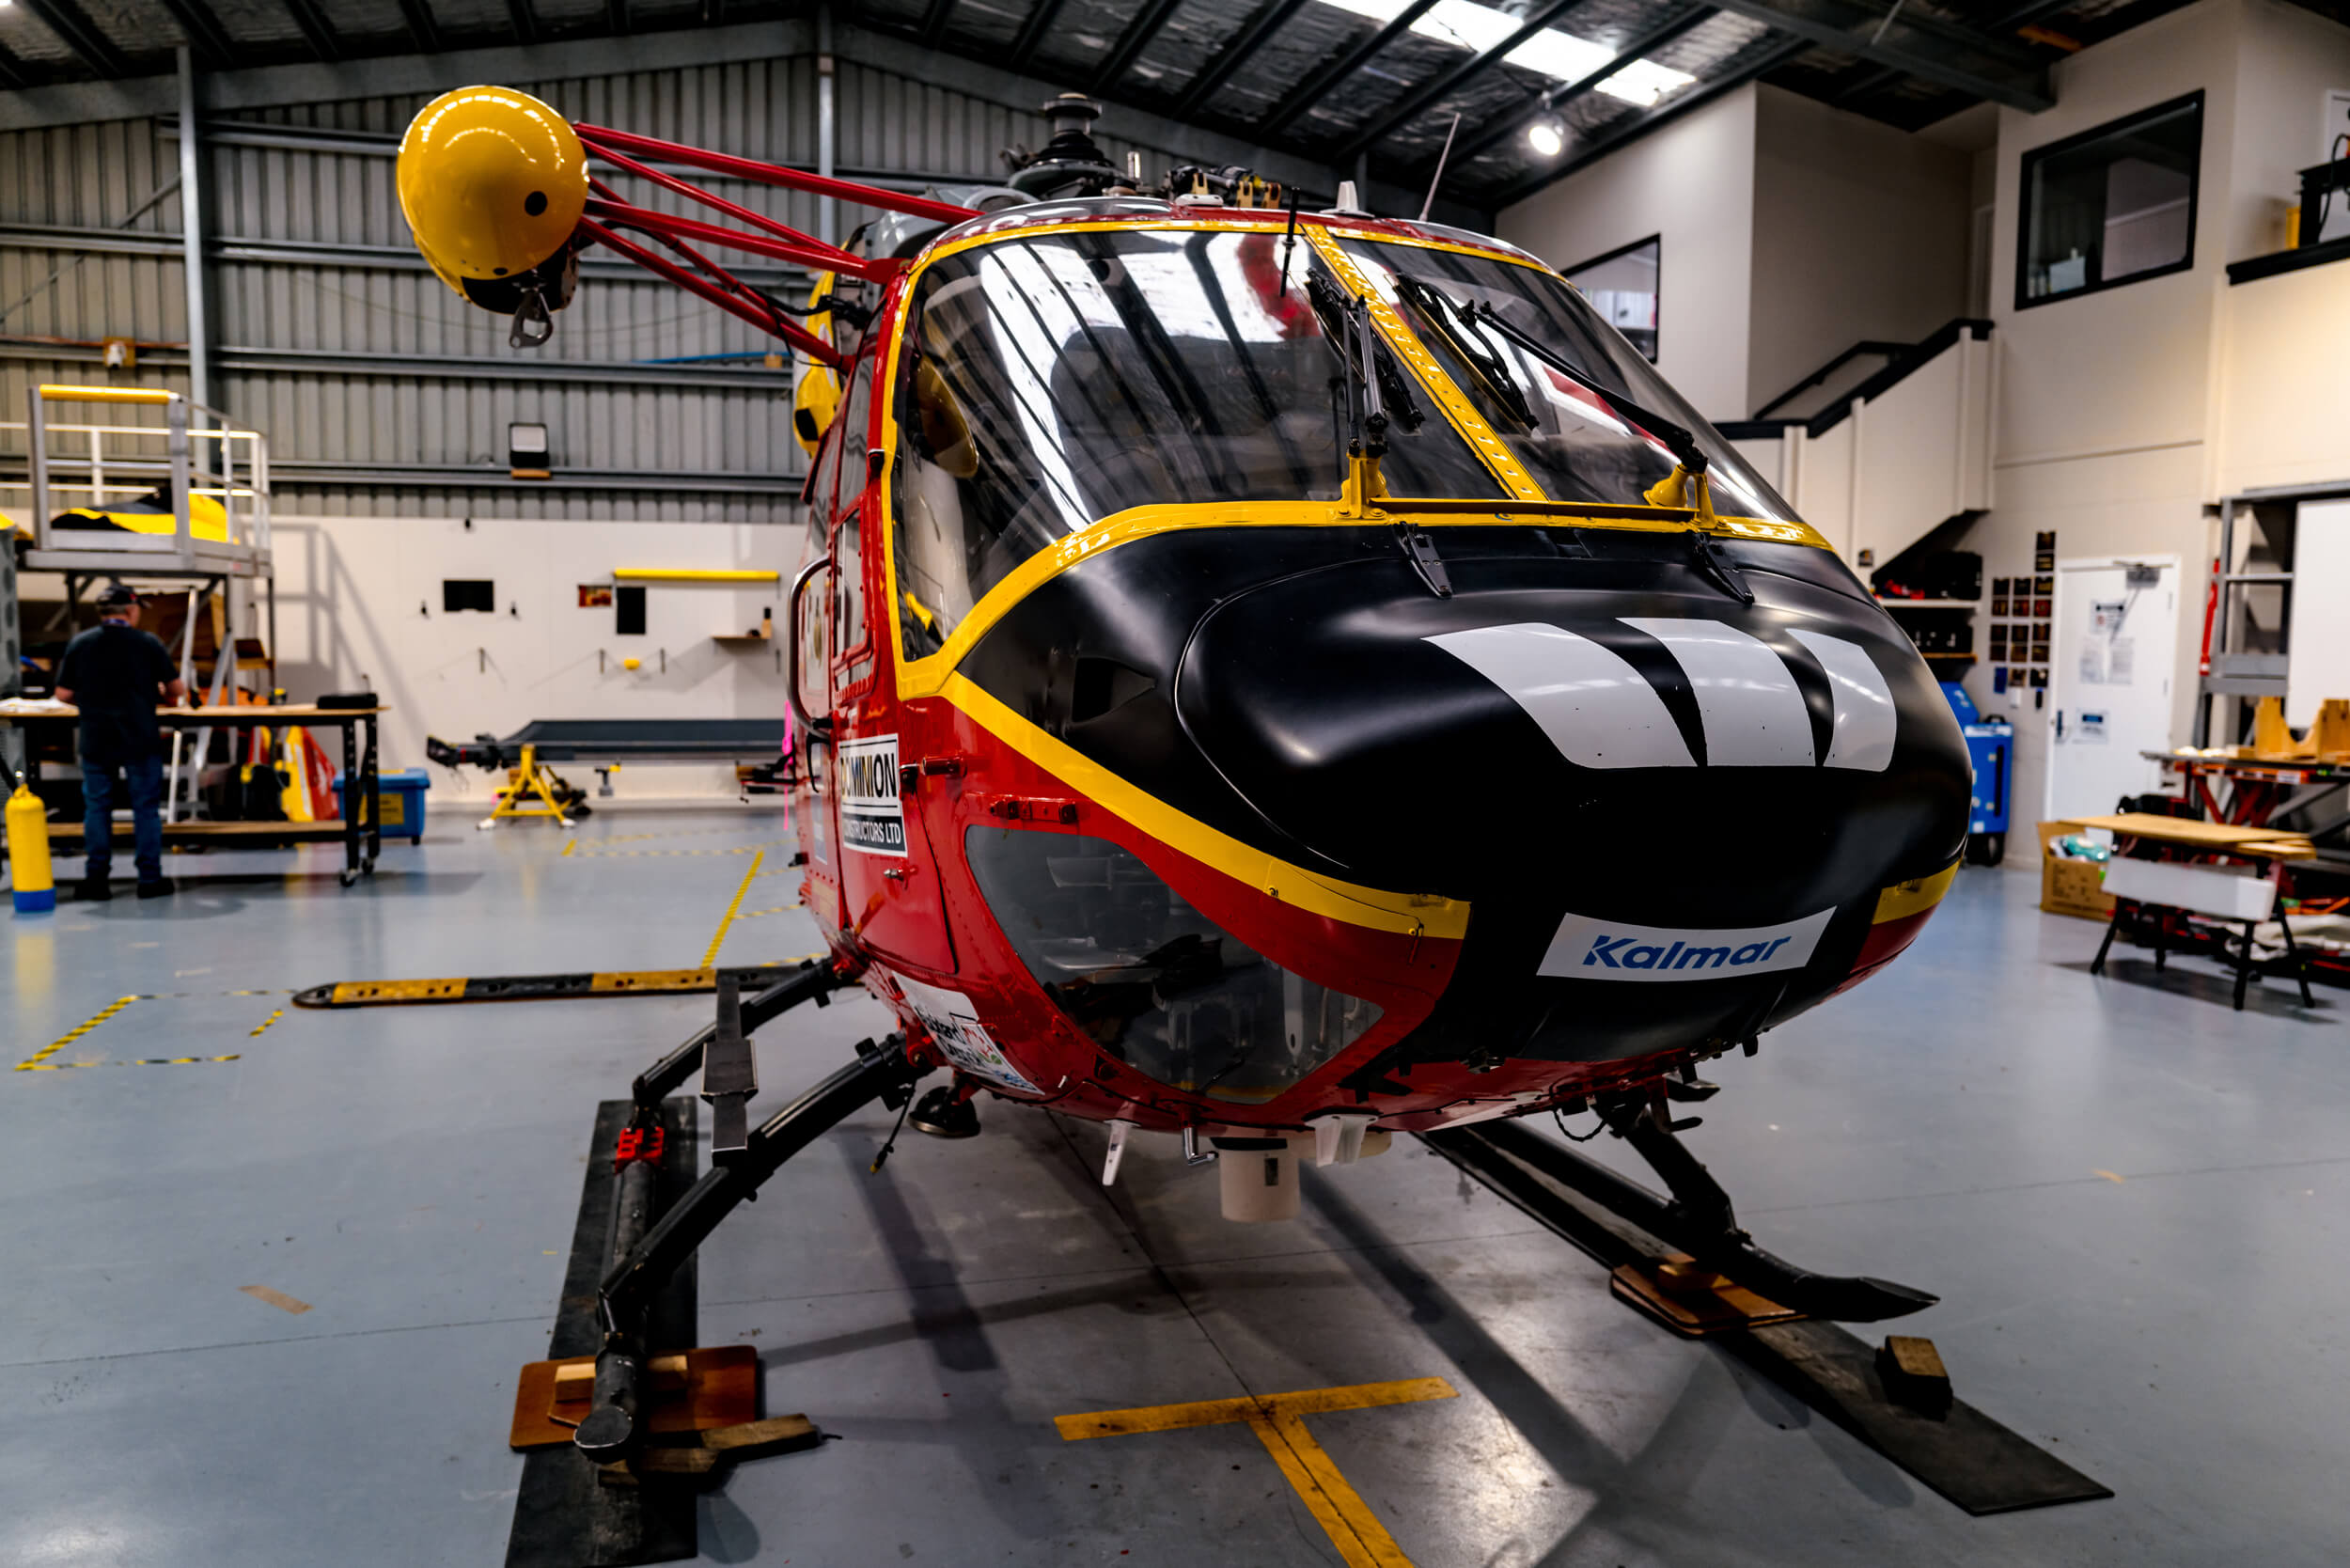 Westpac Helicopter Rescue, Auckland, New Zealand